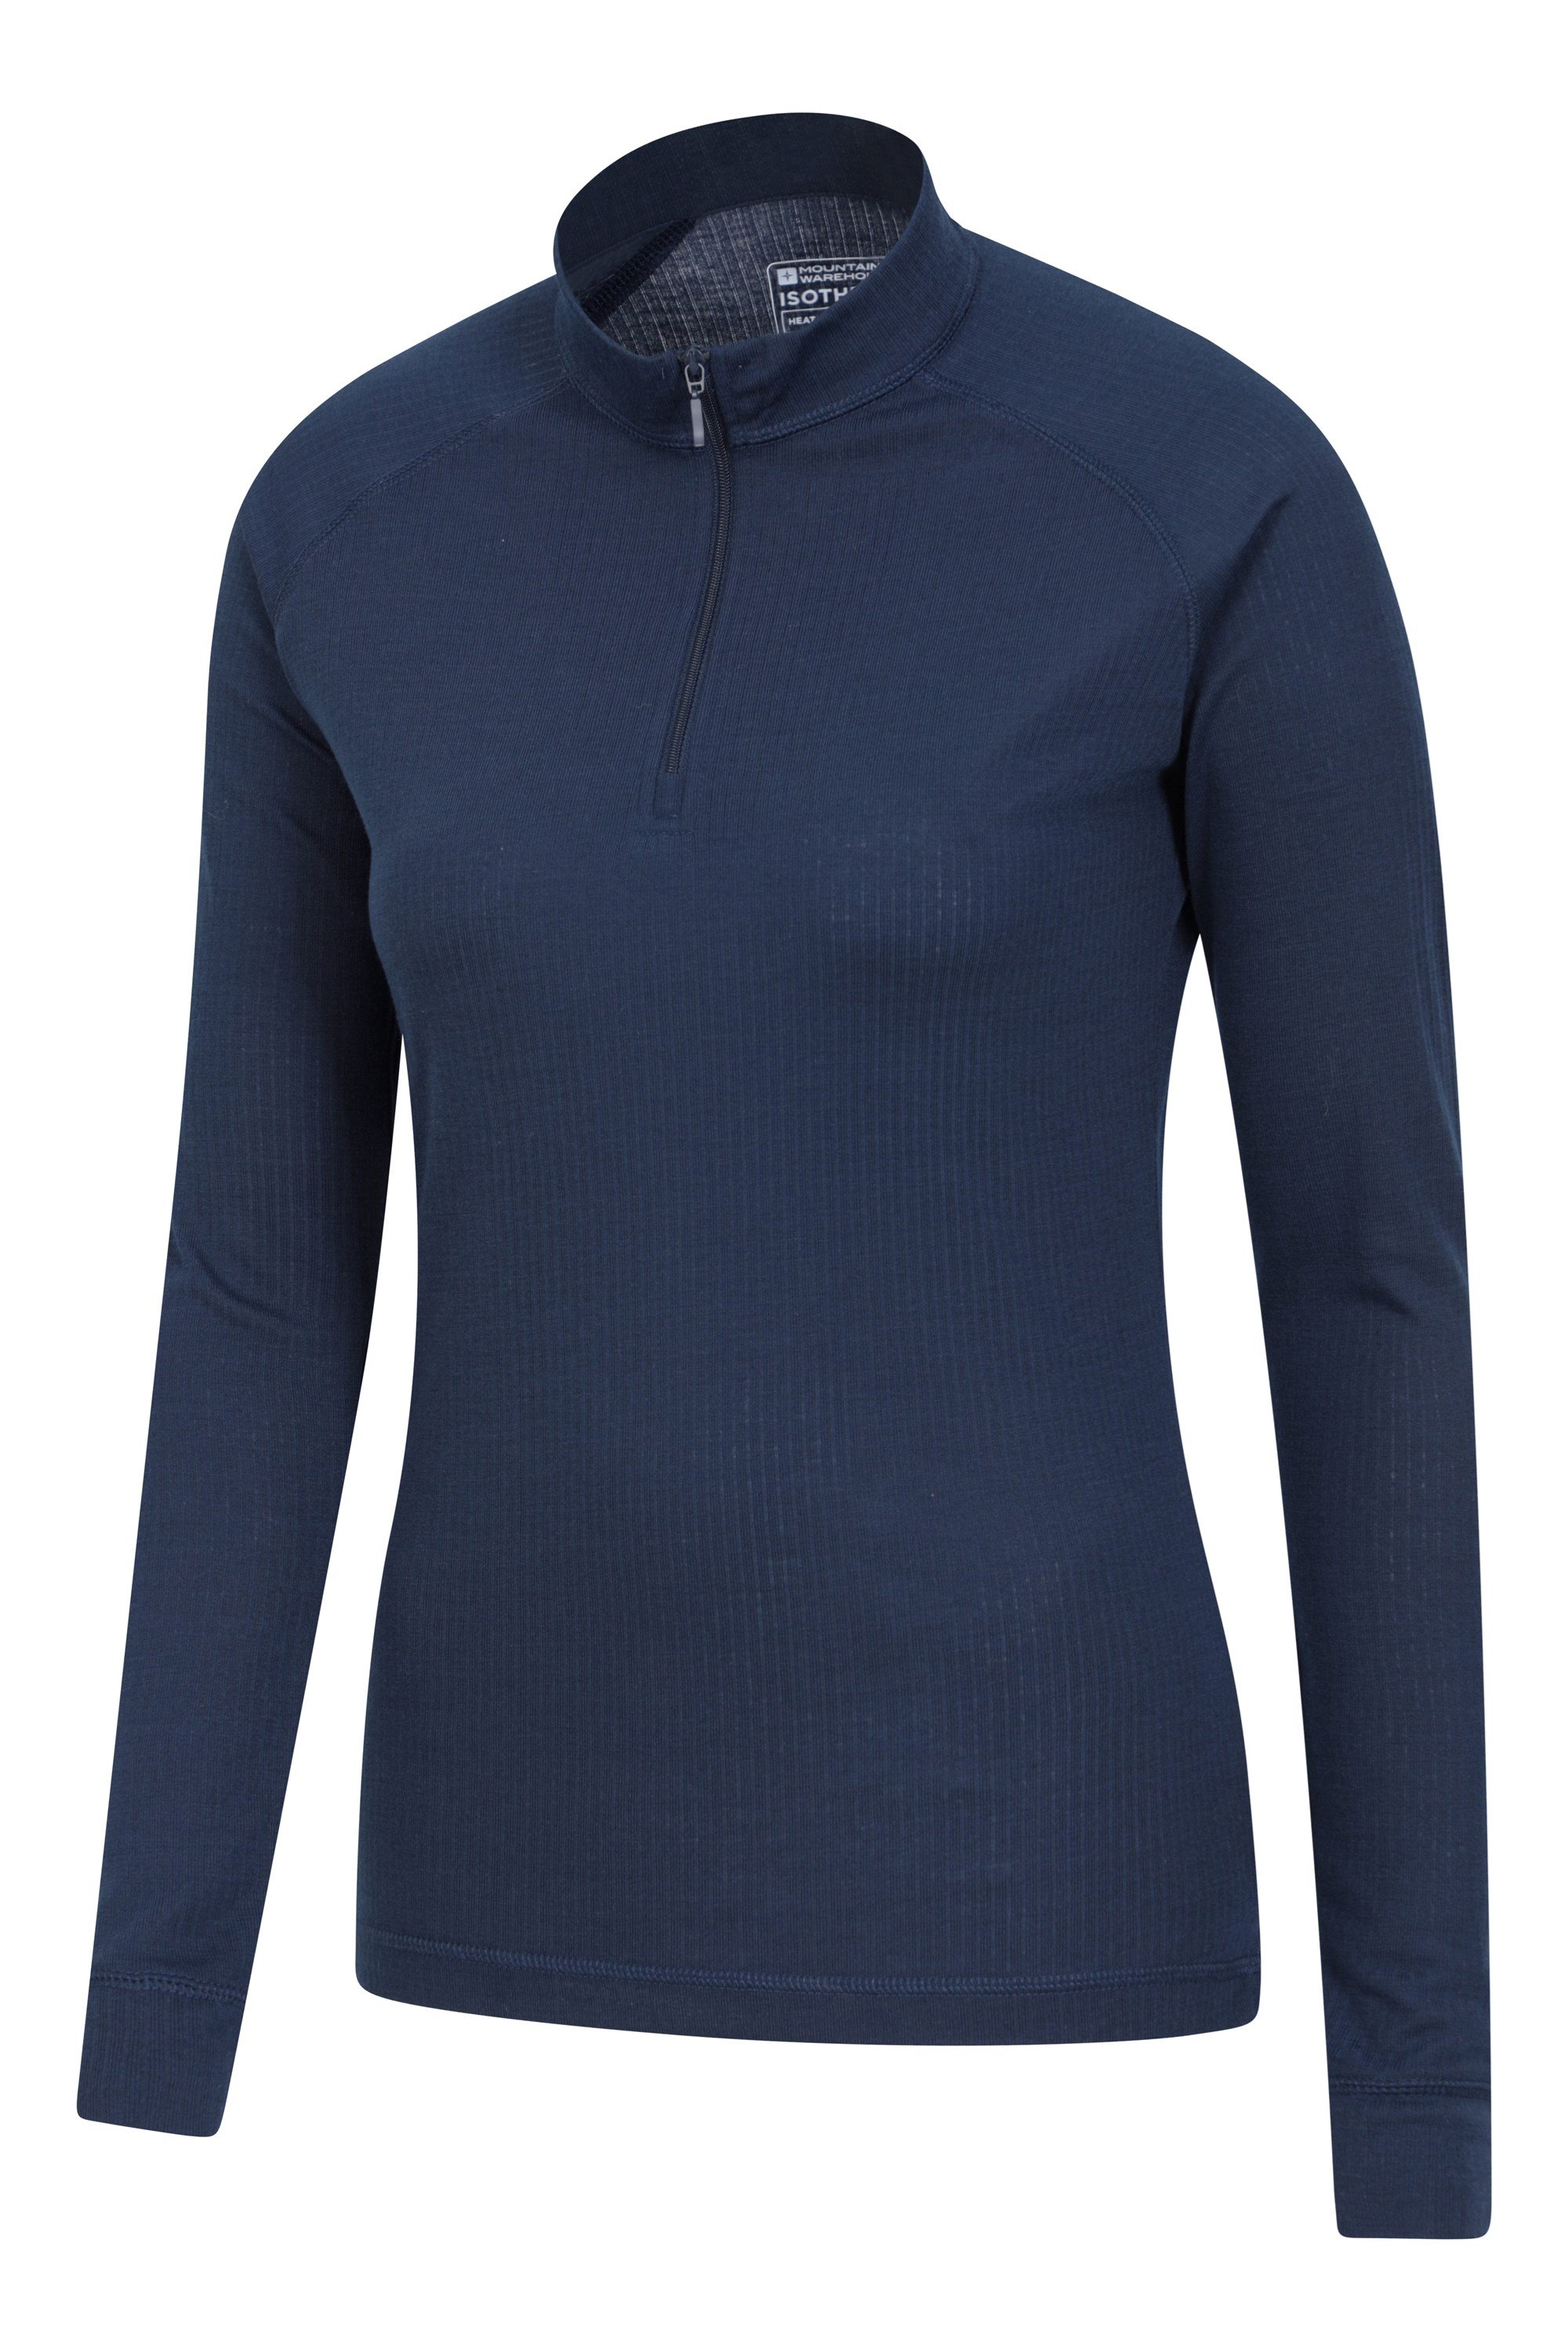 MOUNTAIN WAREHOUSE WOMEN'S Off Piste Seamless Base Layer Top Size S Brand  New £15.00 - PicClick UK